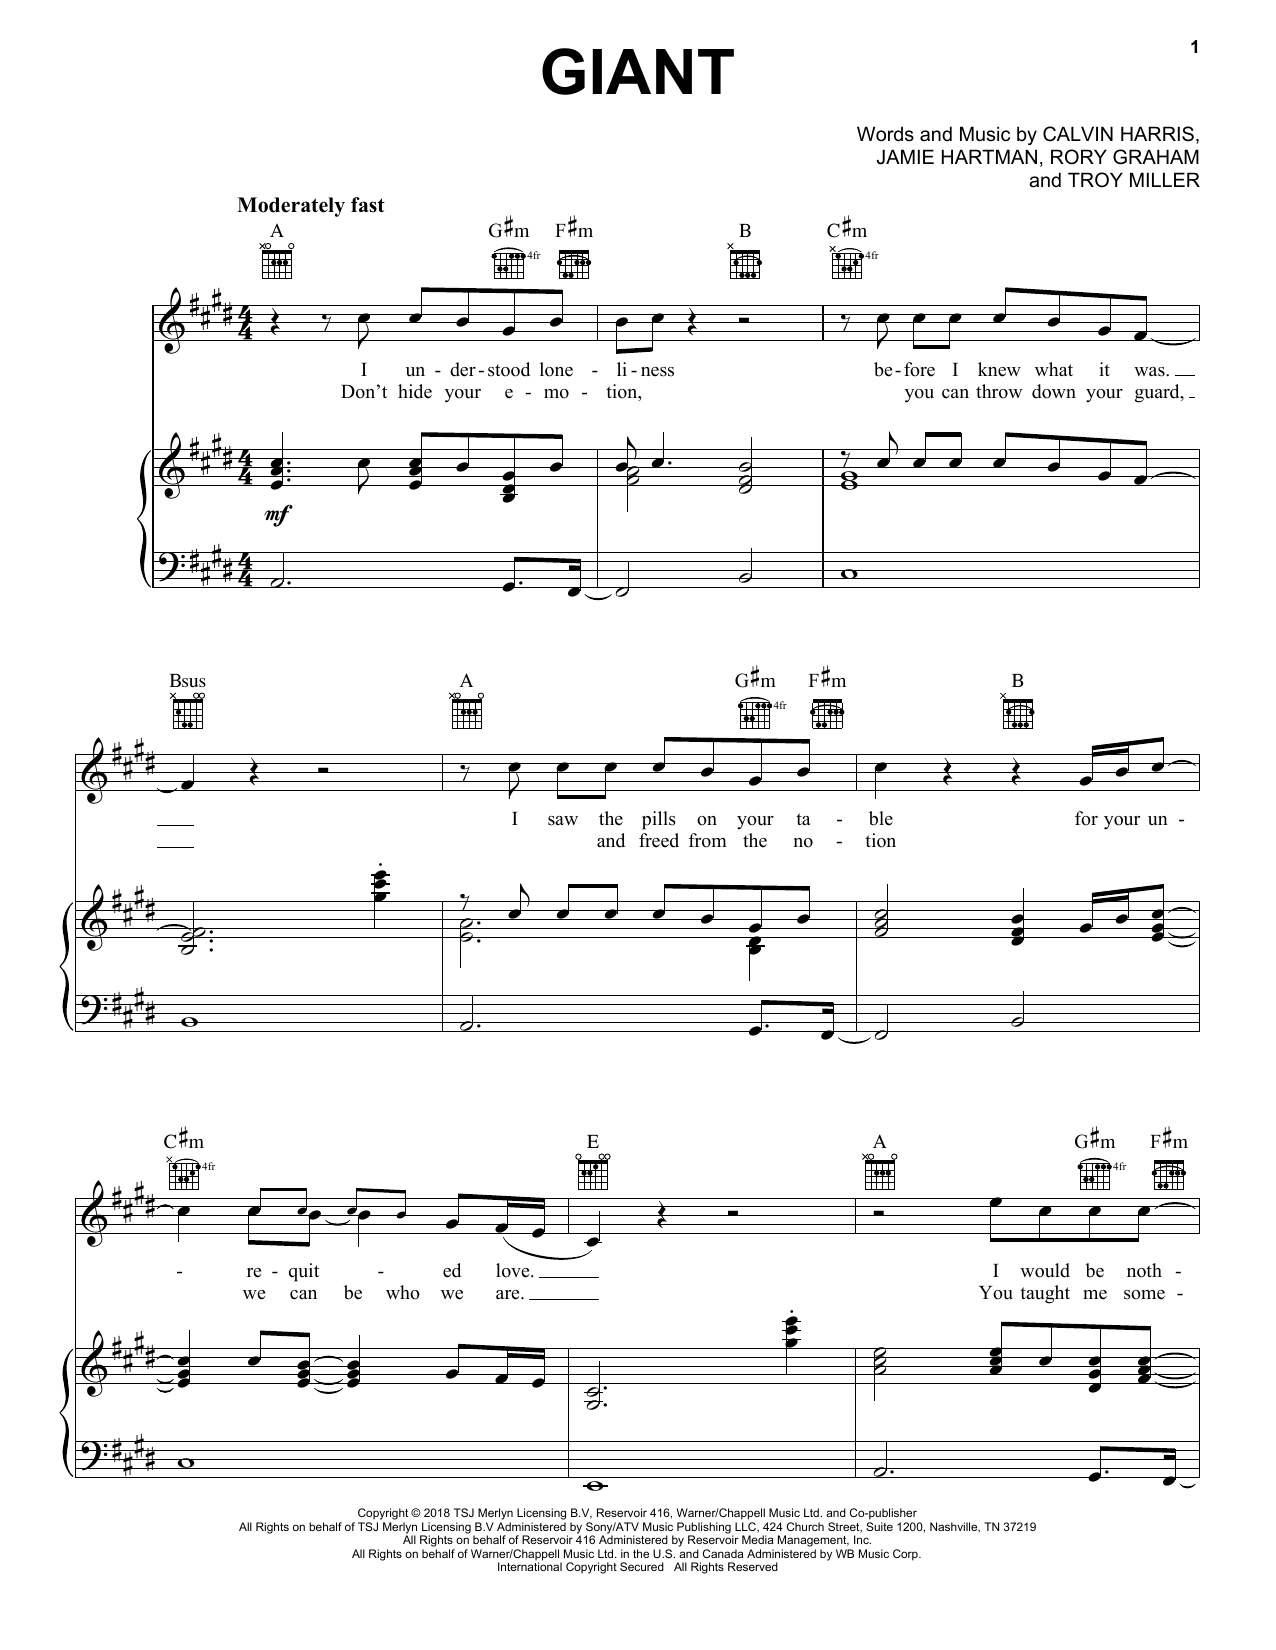 Giant Sheet Music By Calvin Harris For Piano Keyboard And Voice Noteflight Marketplace